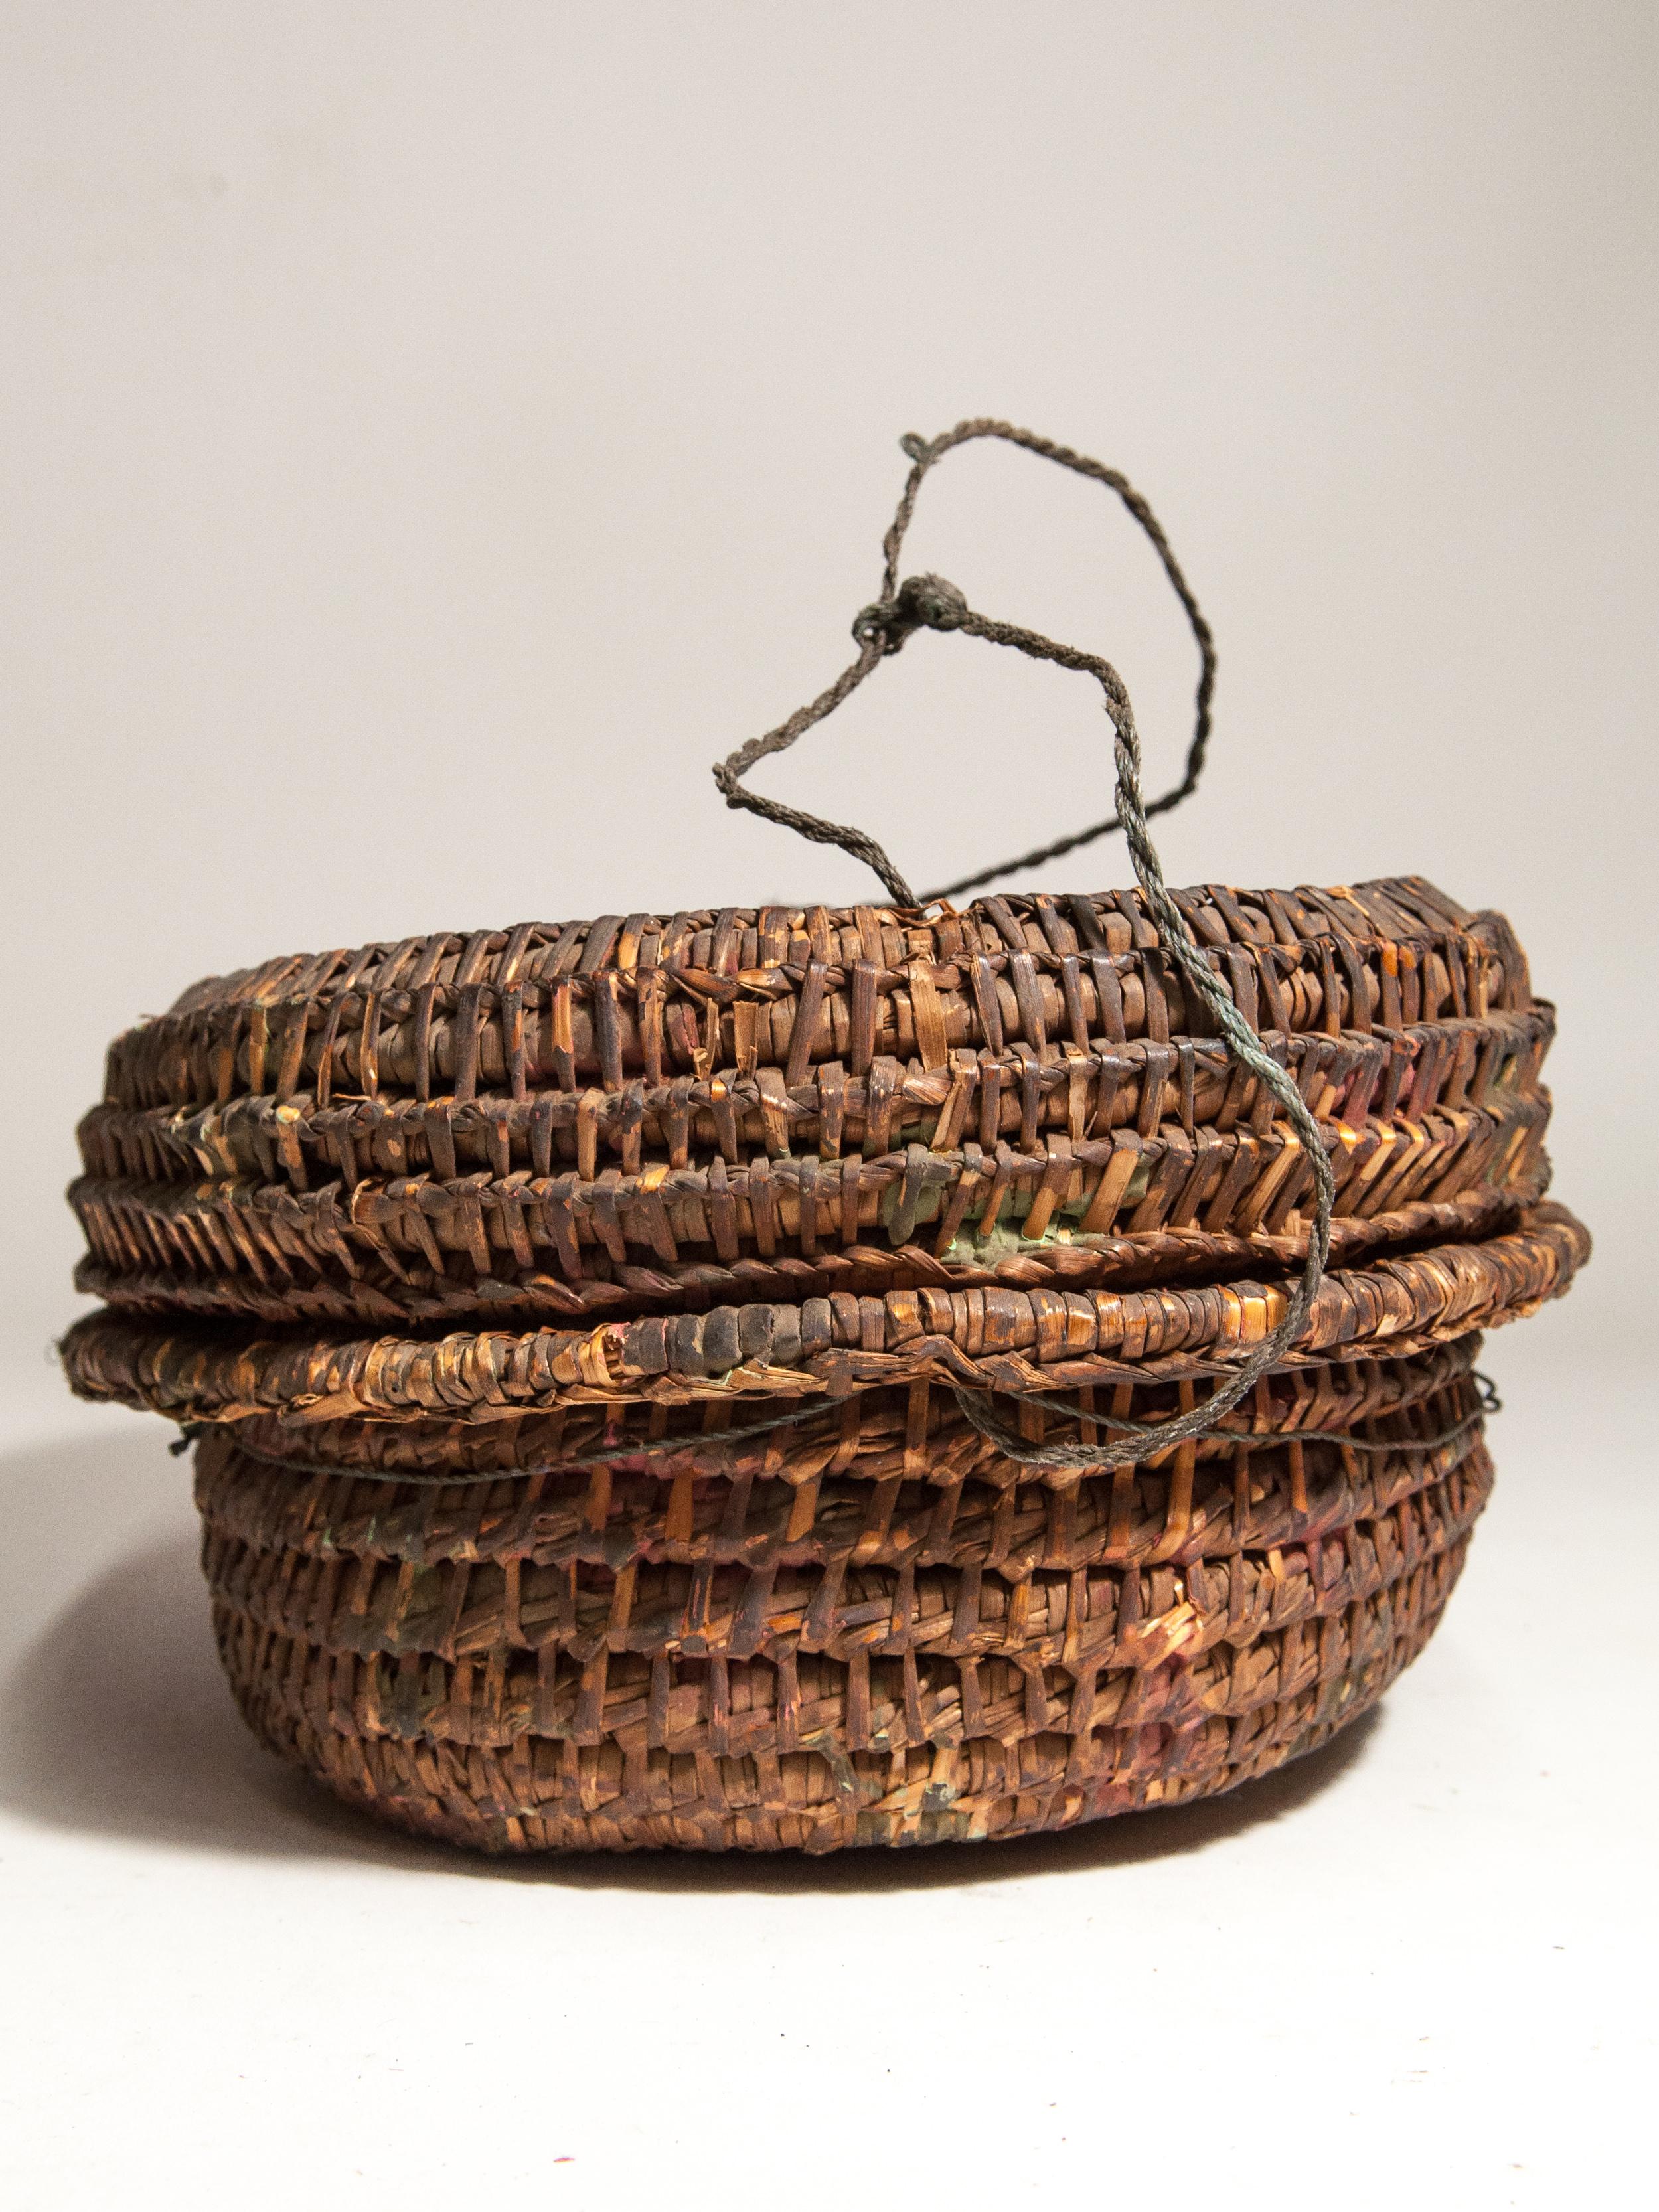 Vintage rustic basket box from the Tharu of Nepal, mid-20th century.
This extremely rustic bamboo basket box is from the Tharu of southern Nepal. It would have been used to hold anything from knick-knacks to valuables in a simple rural home. Woven